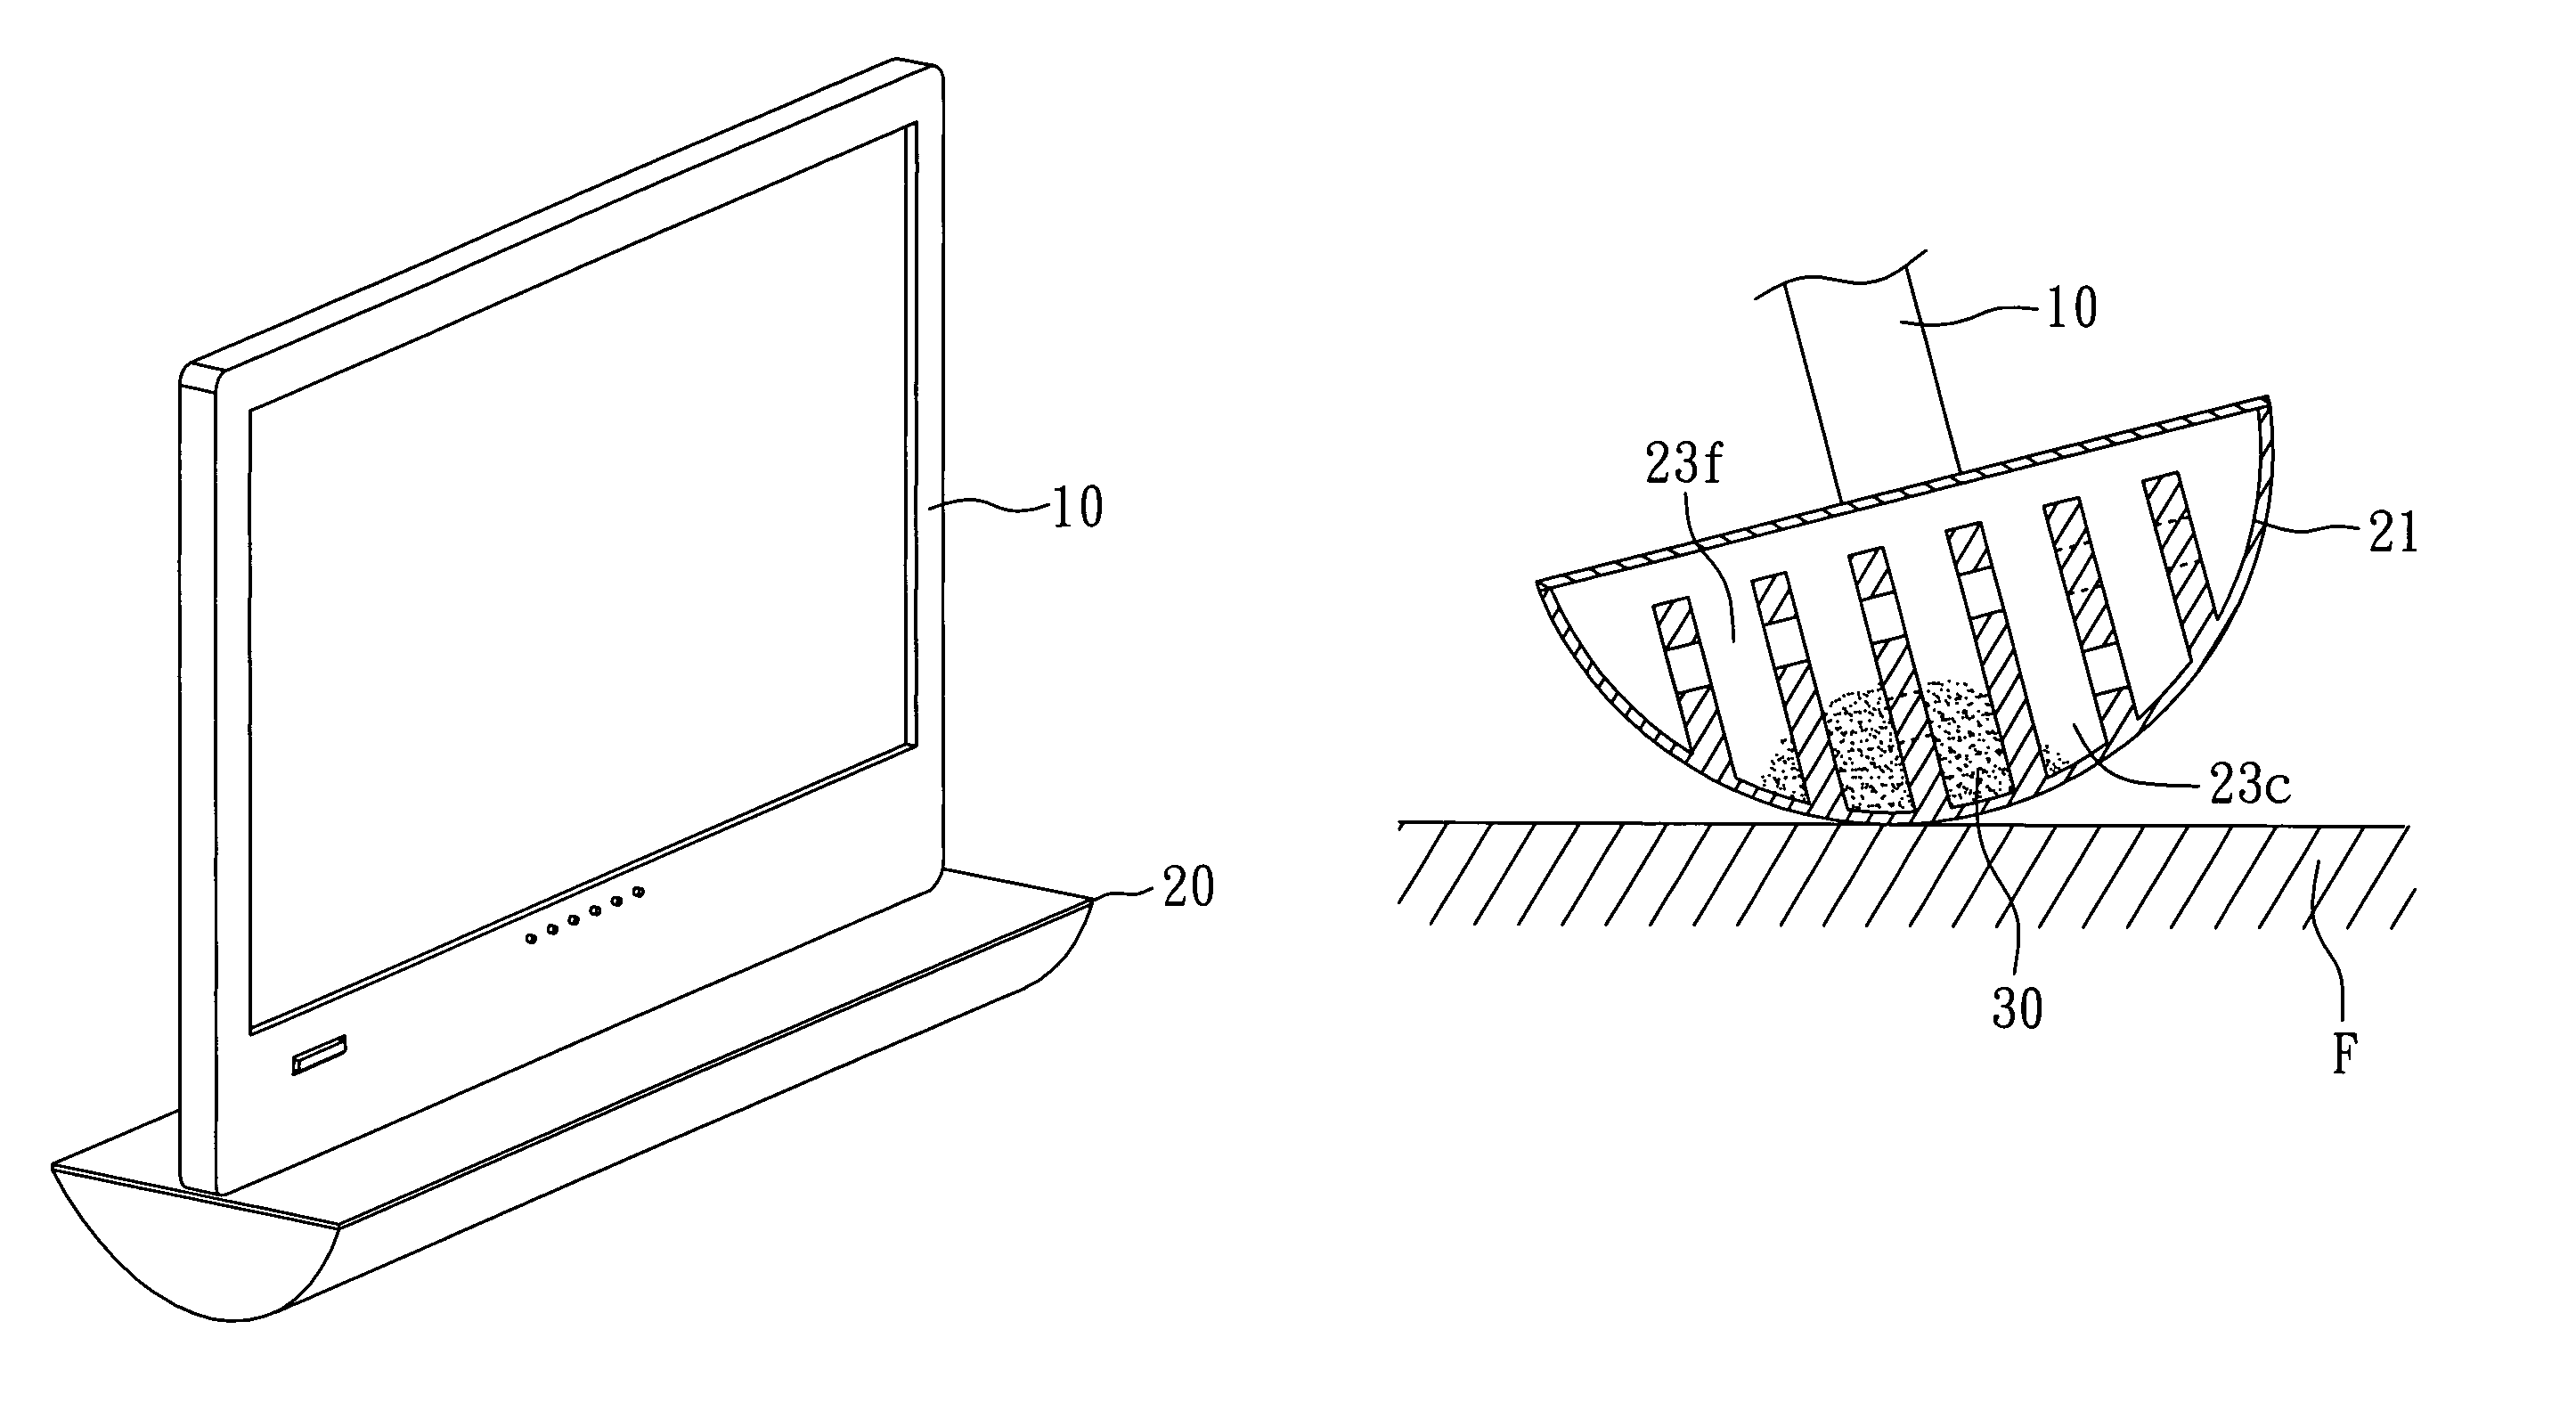 Display with a fluid balance structure